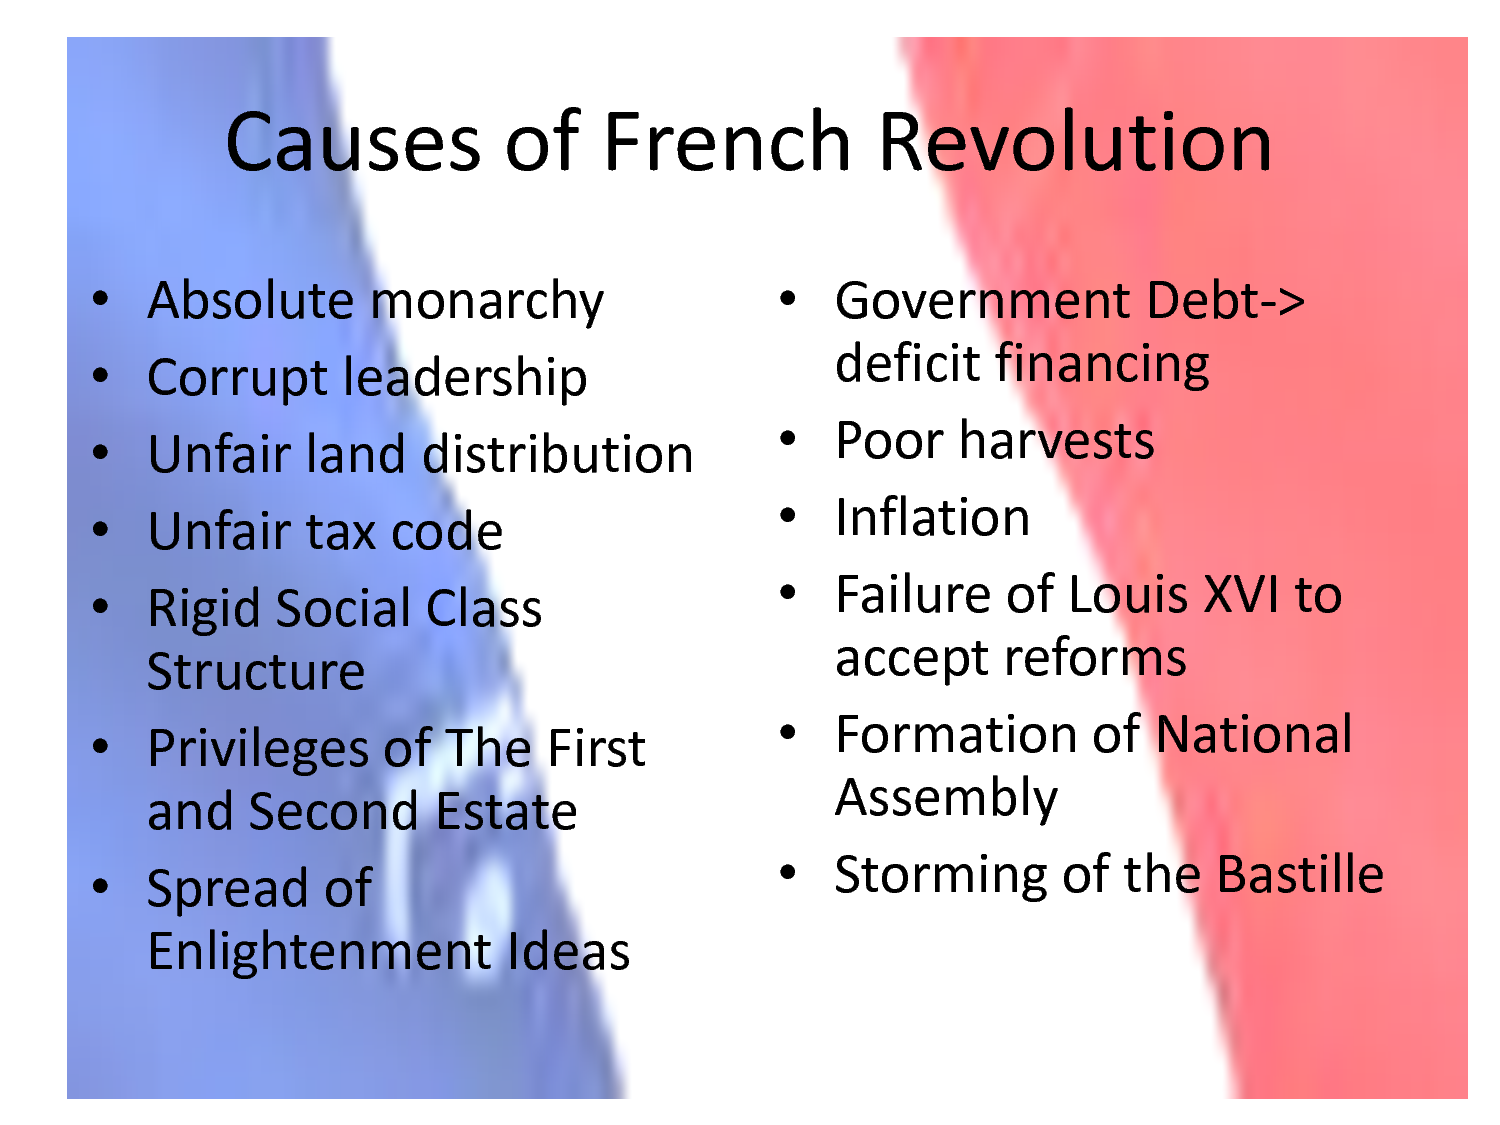 Causes of the french revolution dbq essay